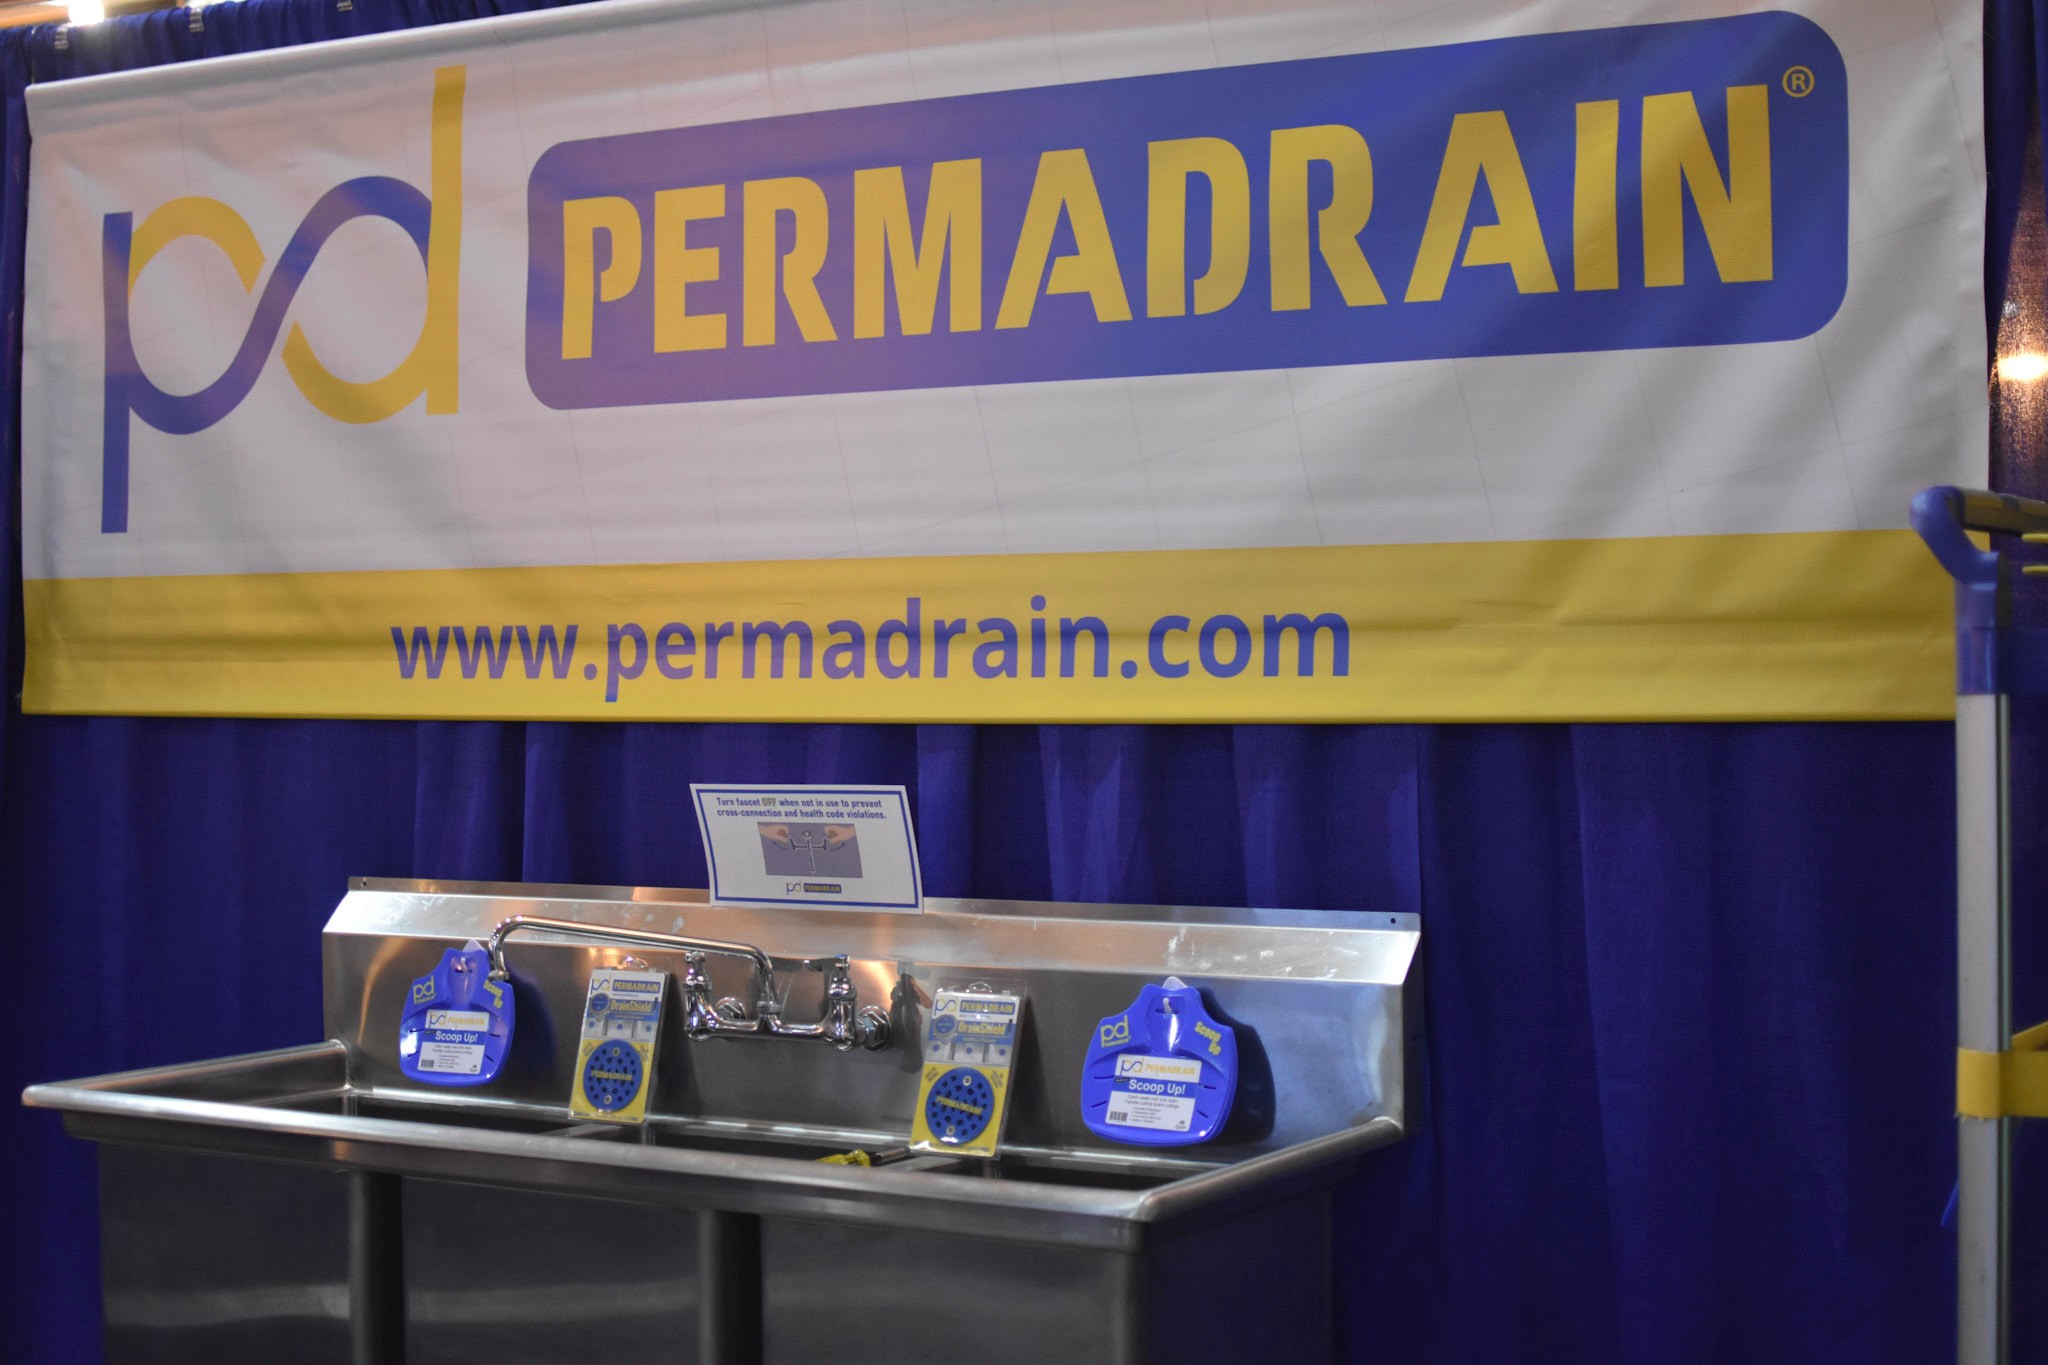 Permadrain product demonstration area at the LRA Expo 2019